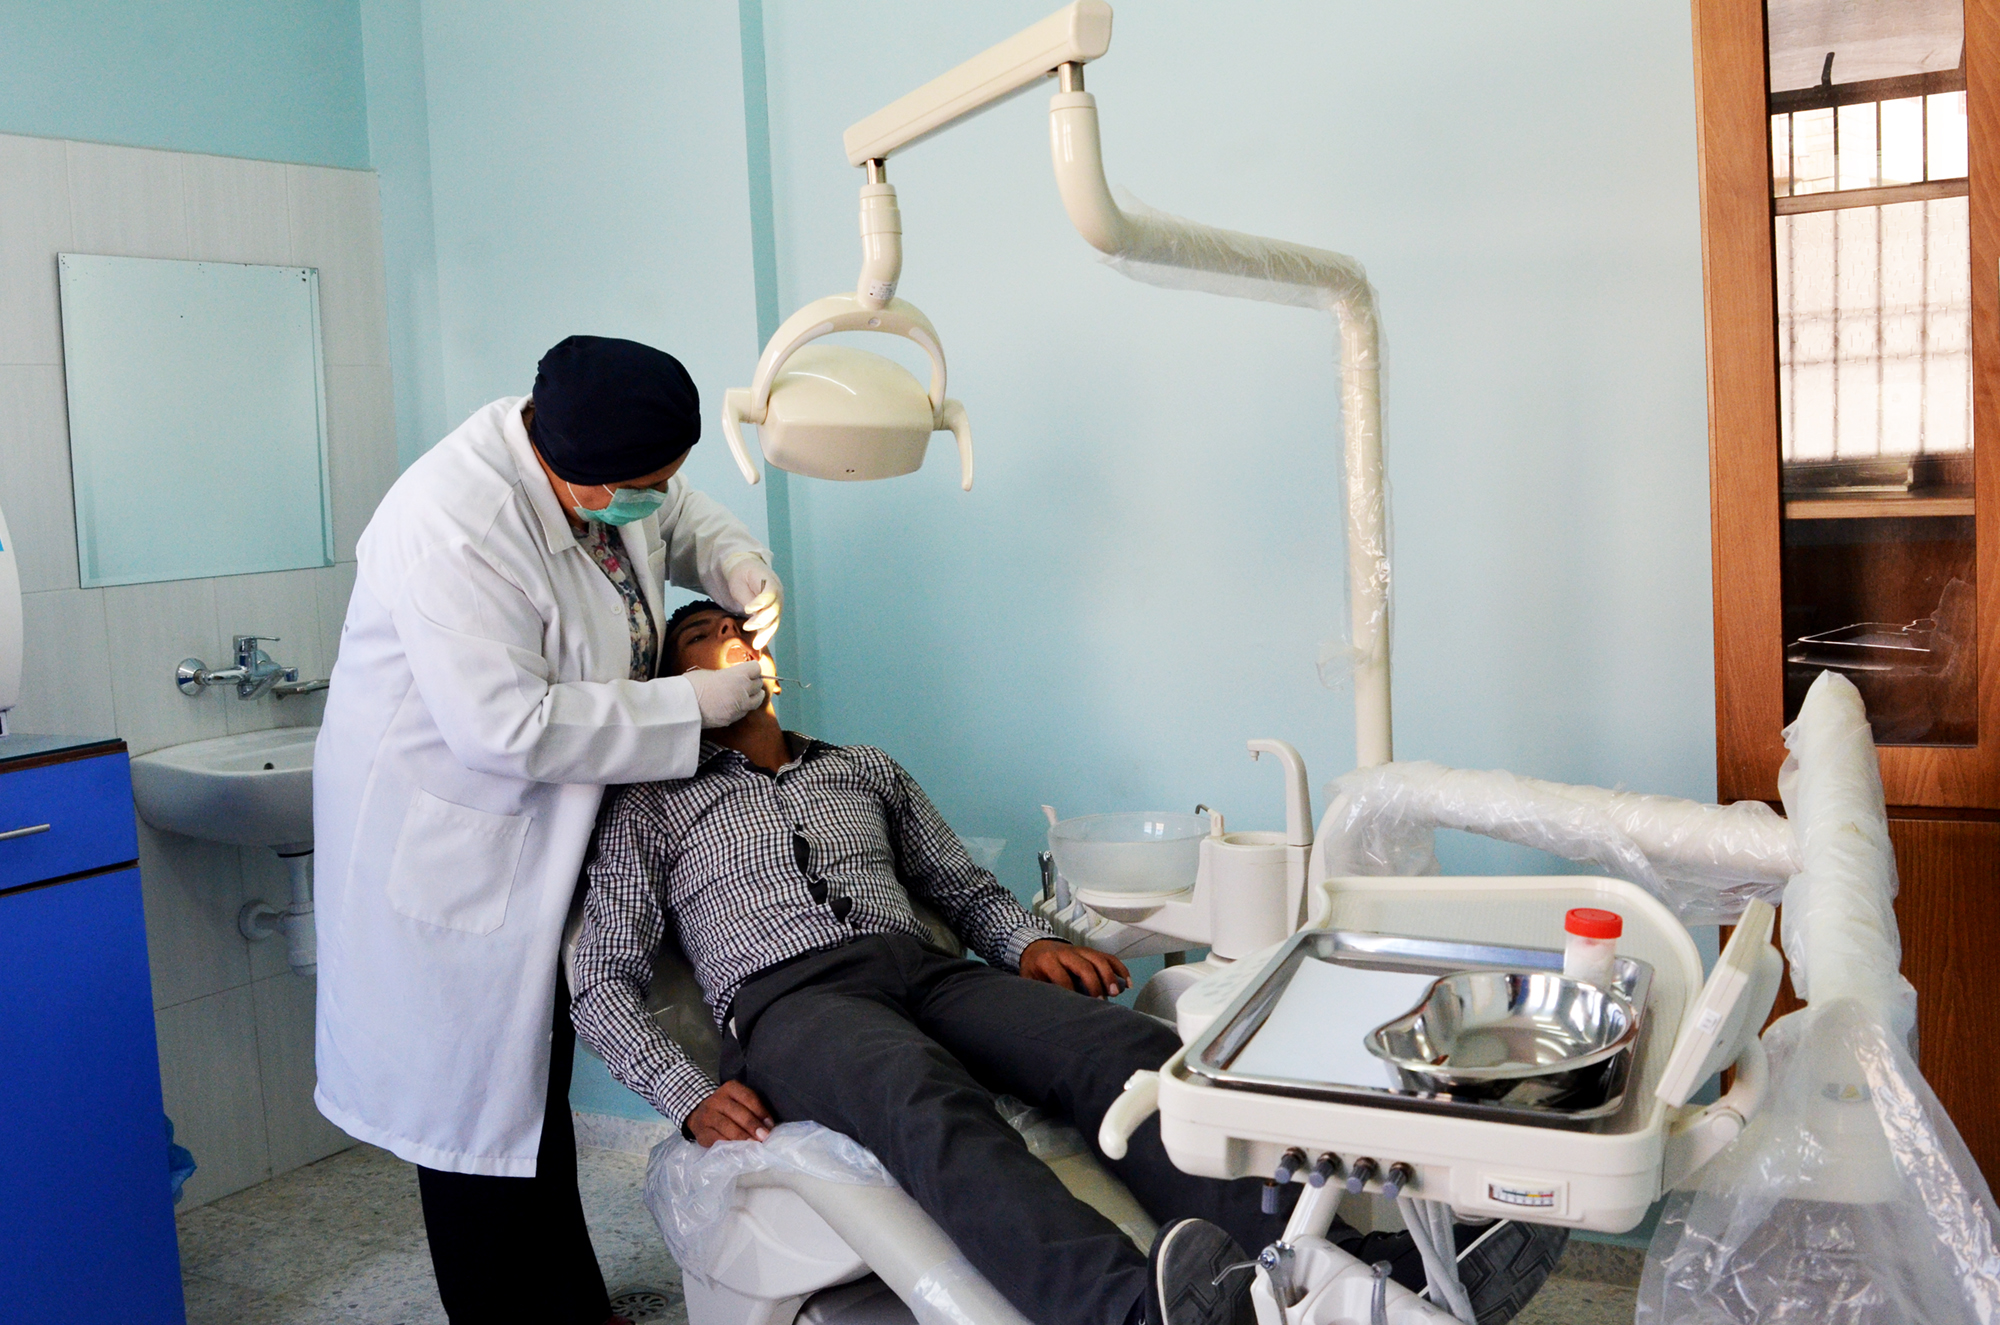 Dr. Abu Haloub checks up the oral health of one of her patients in the Anera built Beit Lahia Health Clinic.